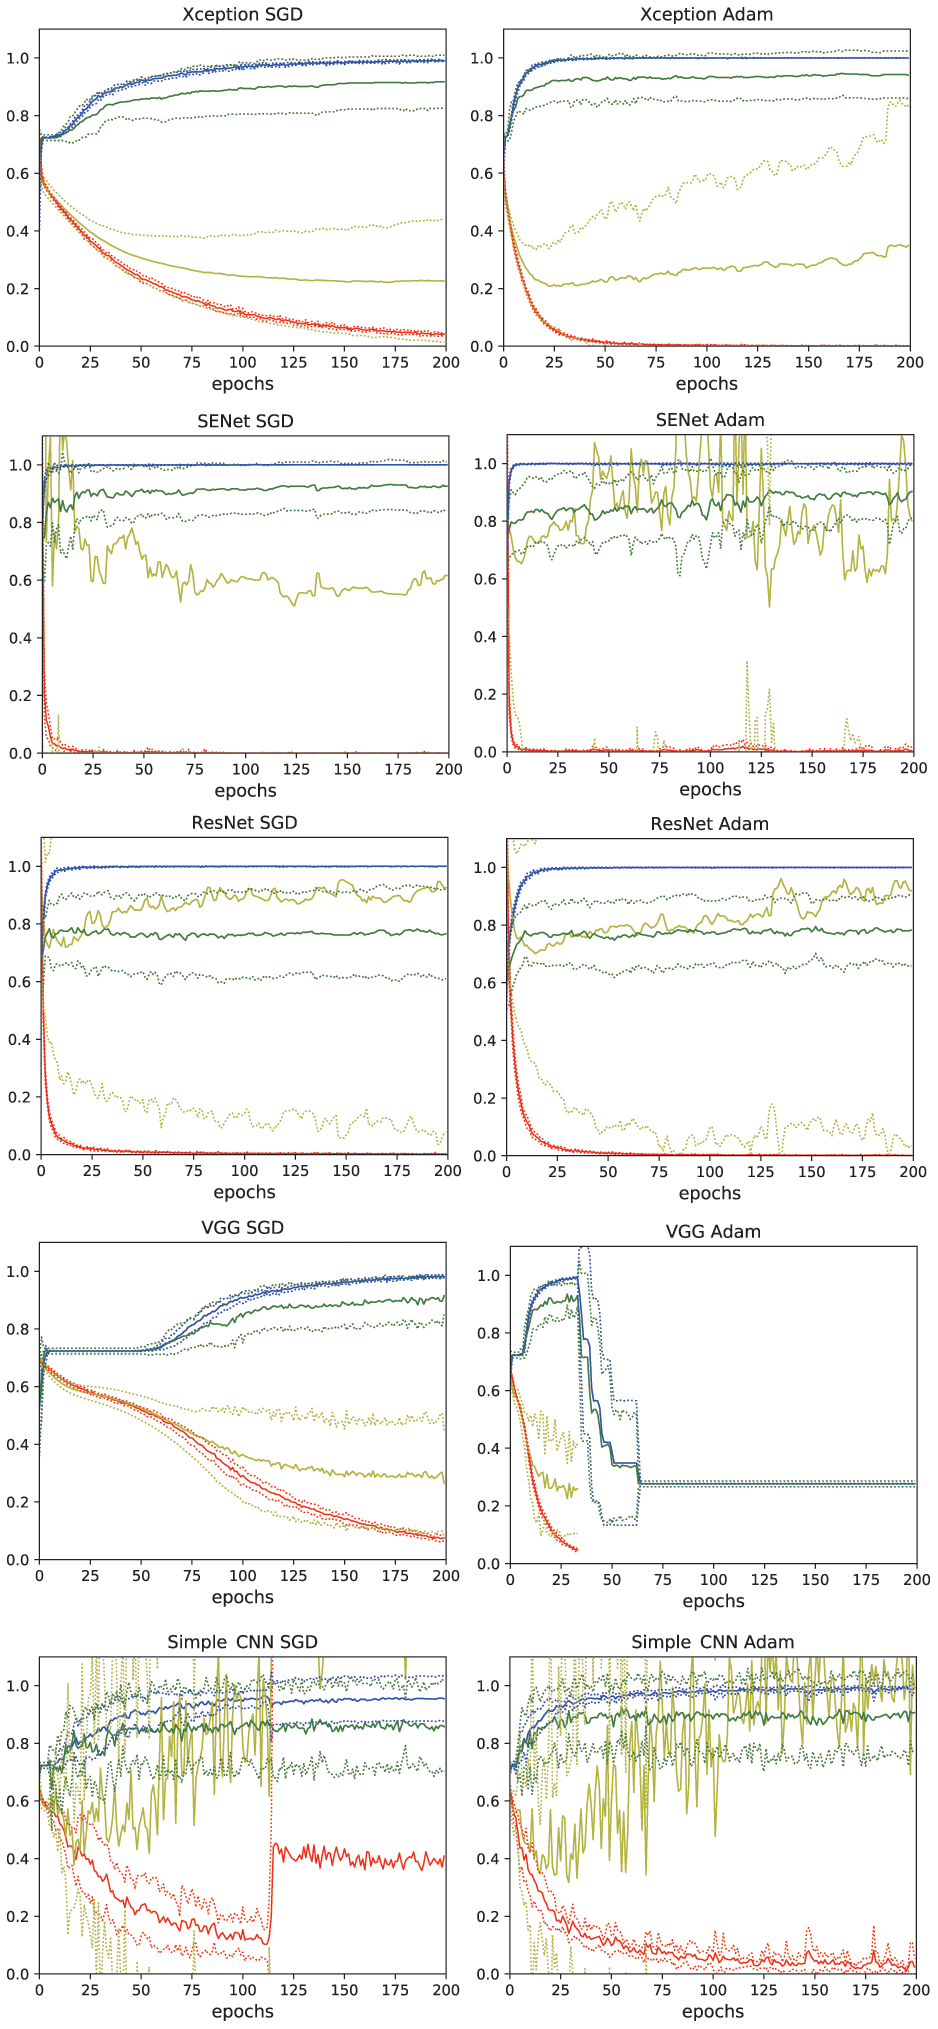 Learning curves of the deep learning models. Xception, SENet50, ResNet50, VGG16, and simple CNN with SGD and Adam optimizers were tested. The thin lines denote mean ± standard deviation of 10 groups. blue: accuracy, red: loss, green: validation accuracy, yellow: validation loss.